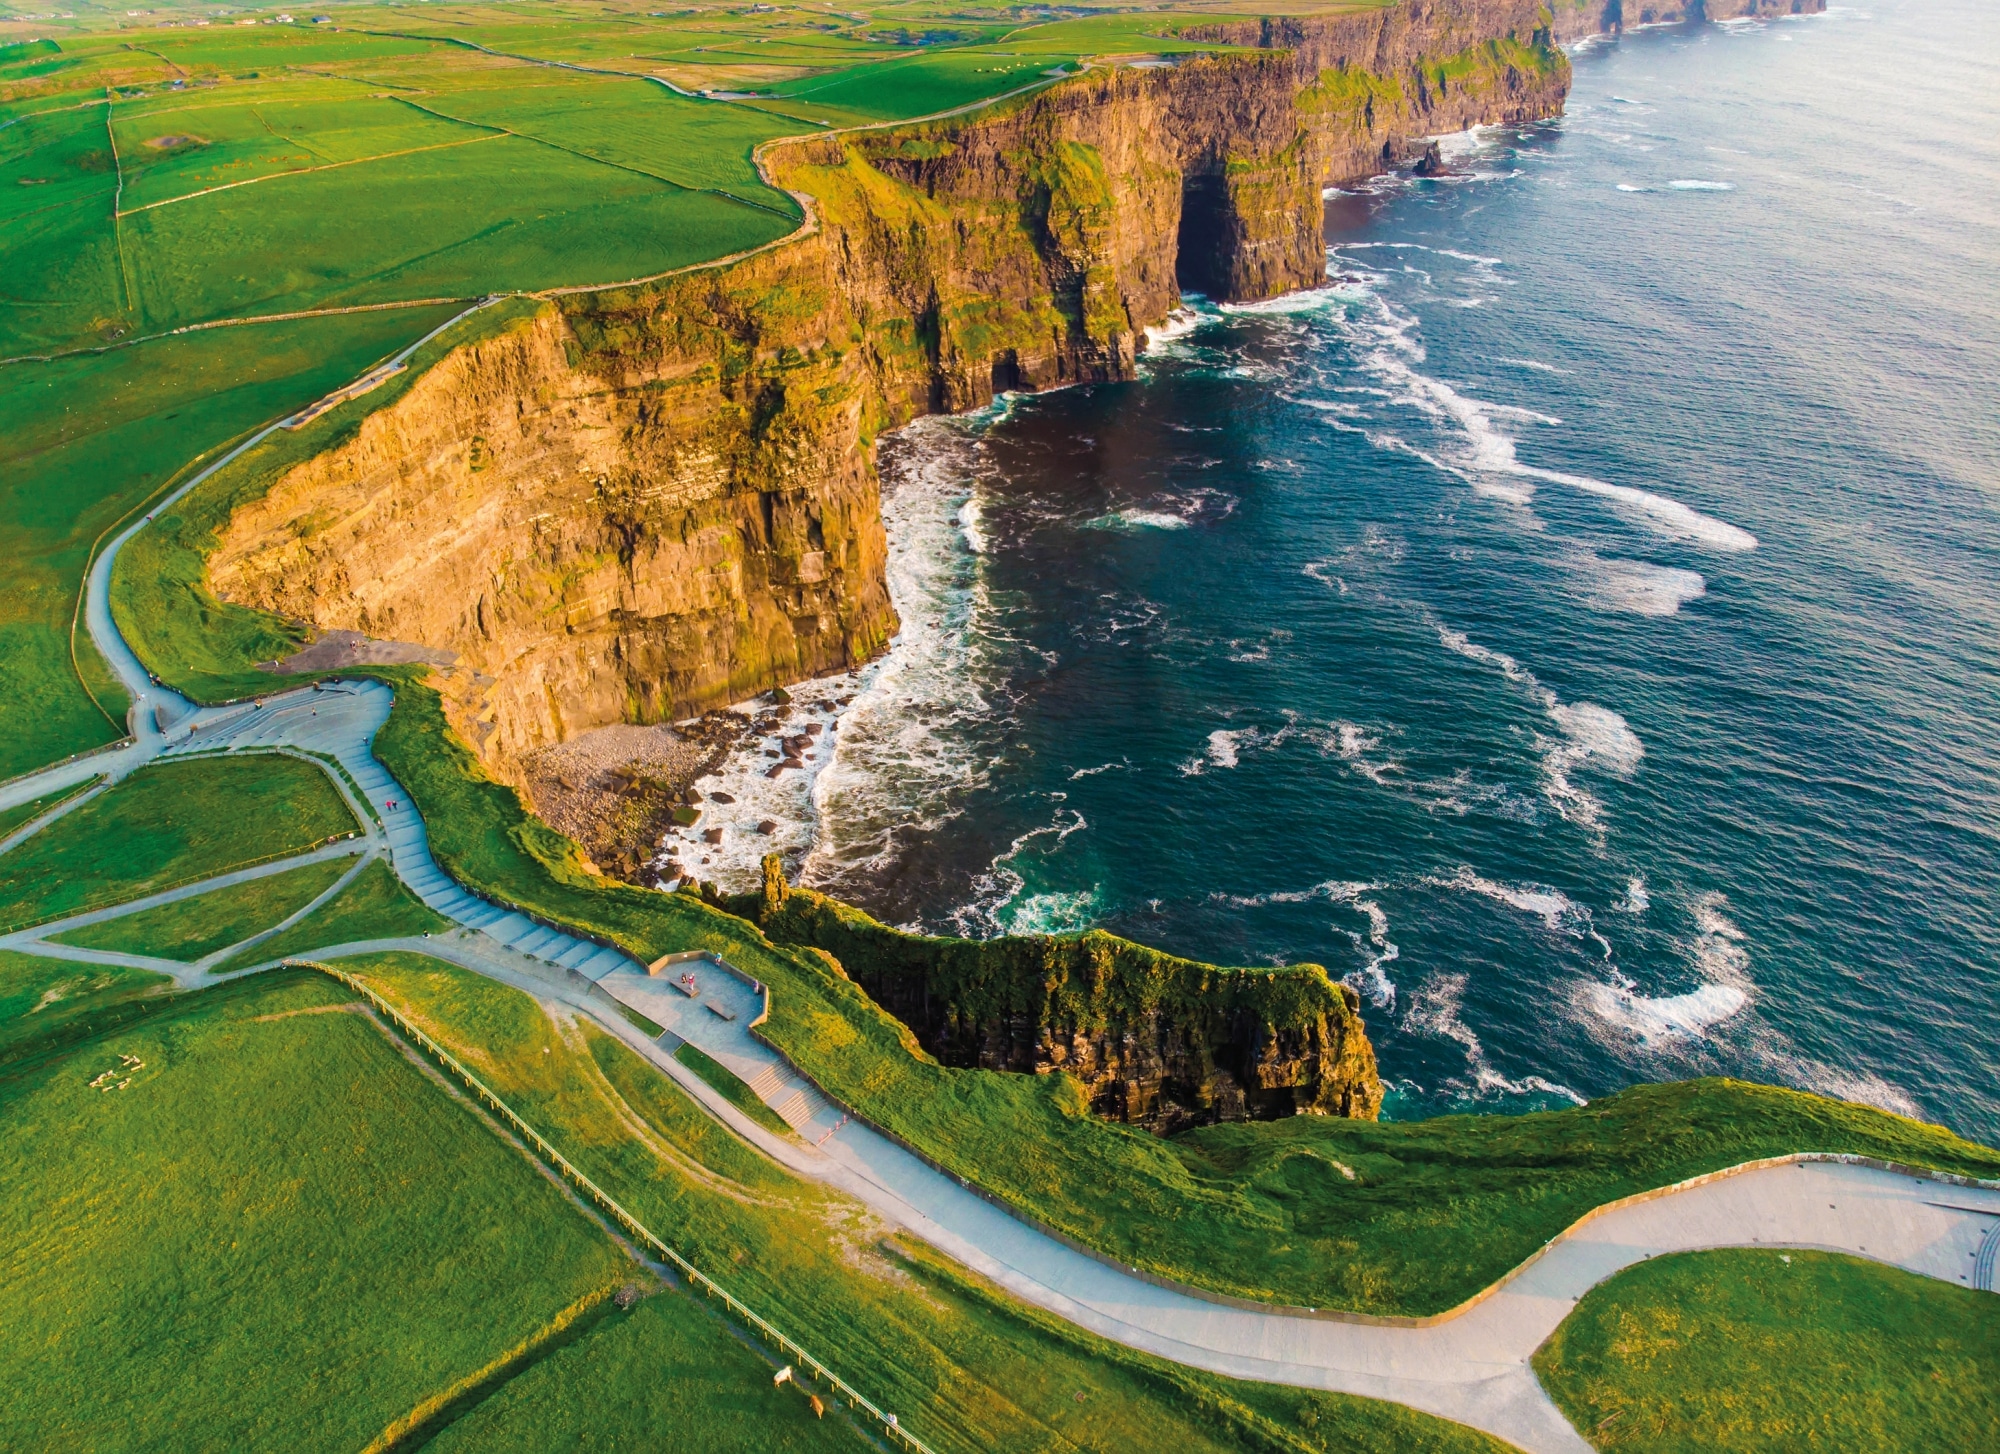 Irland, Cliffs of Moher